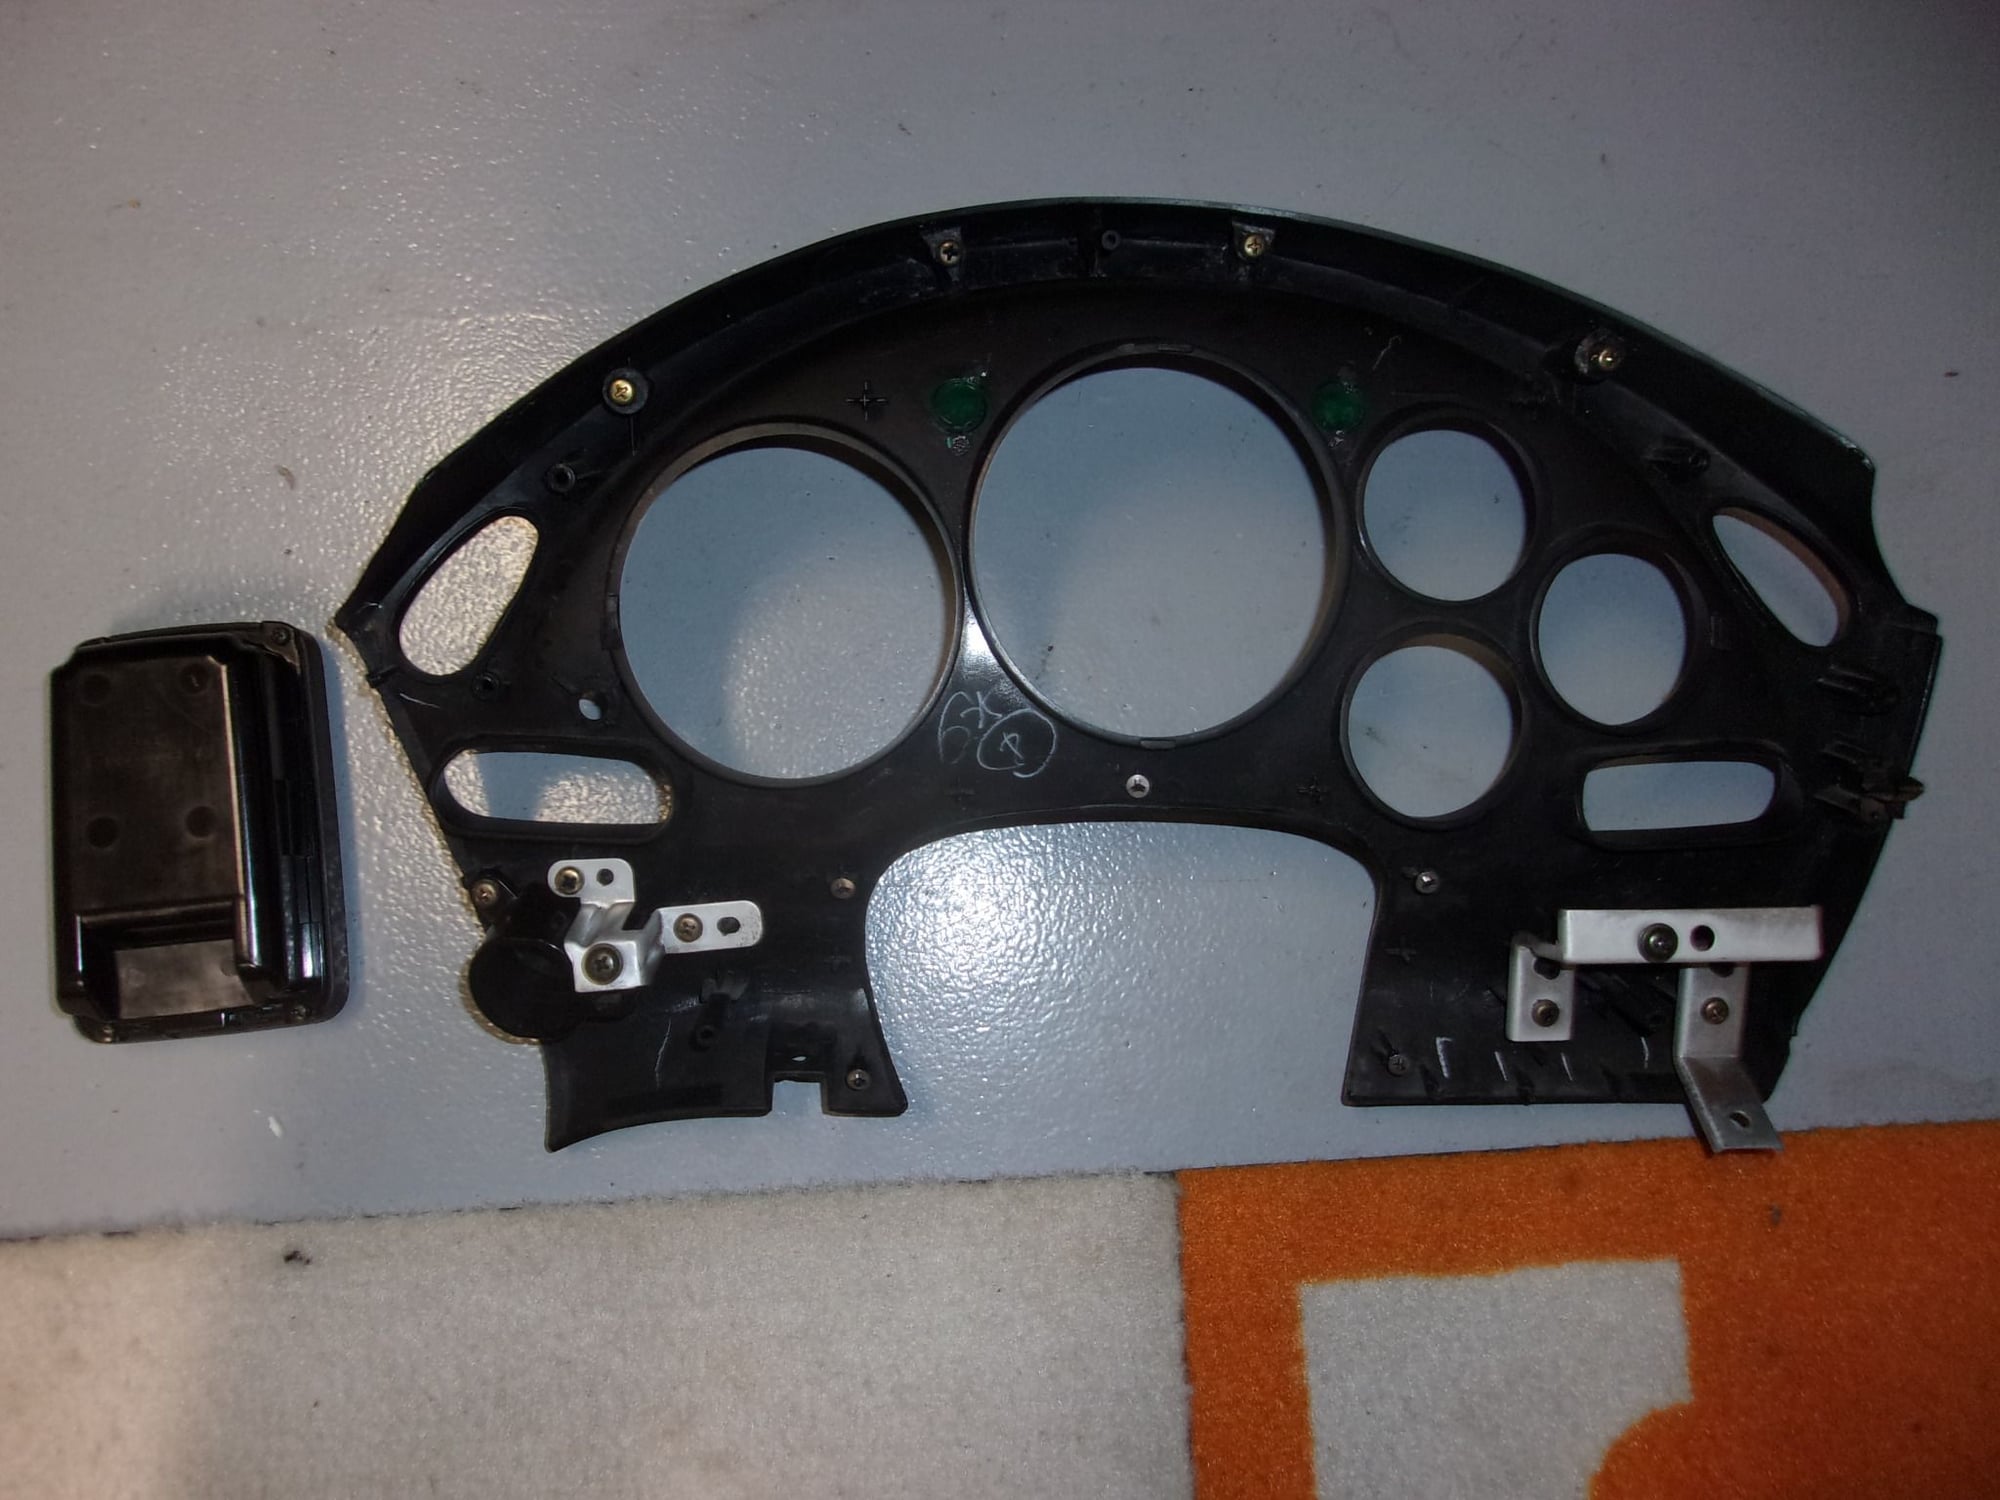 Interior/Upholstery - Meter Face and Ash Tray - Used - 1993 to 1995 Mazda RX-7 - Murfreesboro, TN 37130, United States